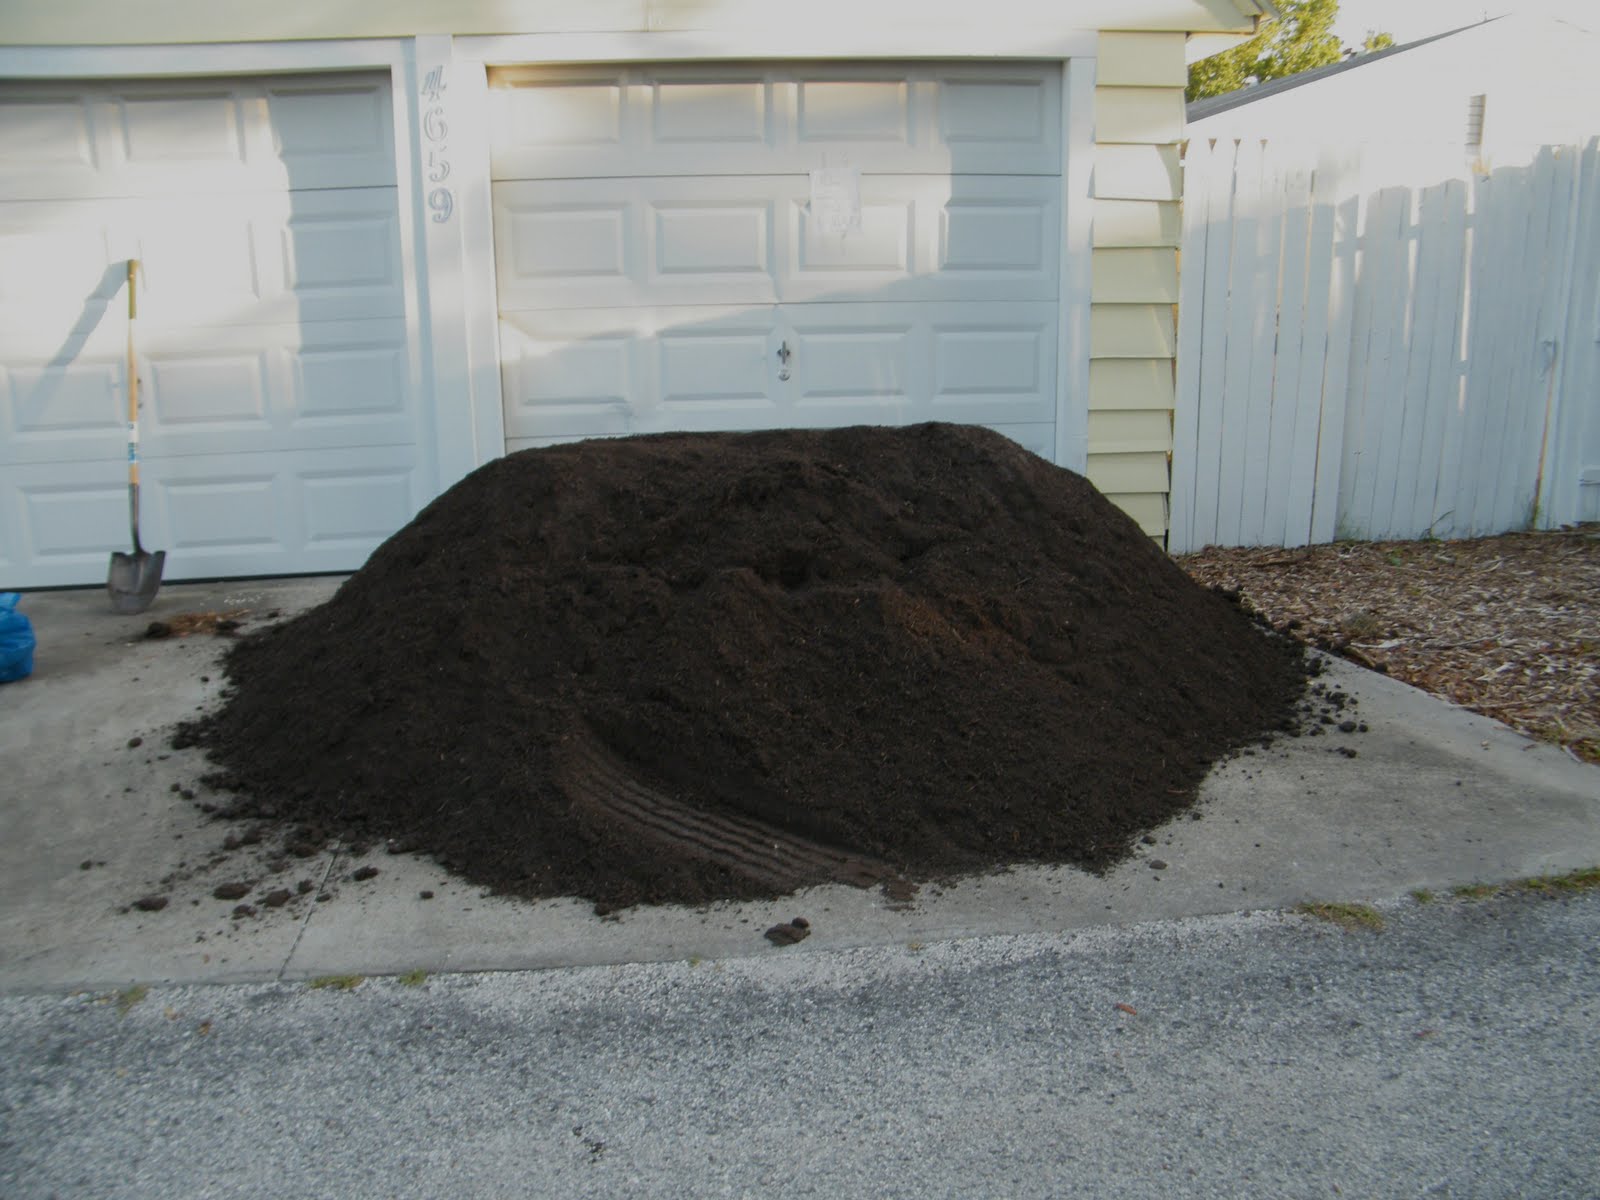 Central Florida garden: My New Pile of Dirt